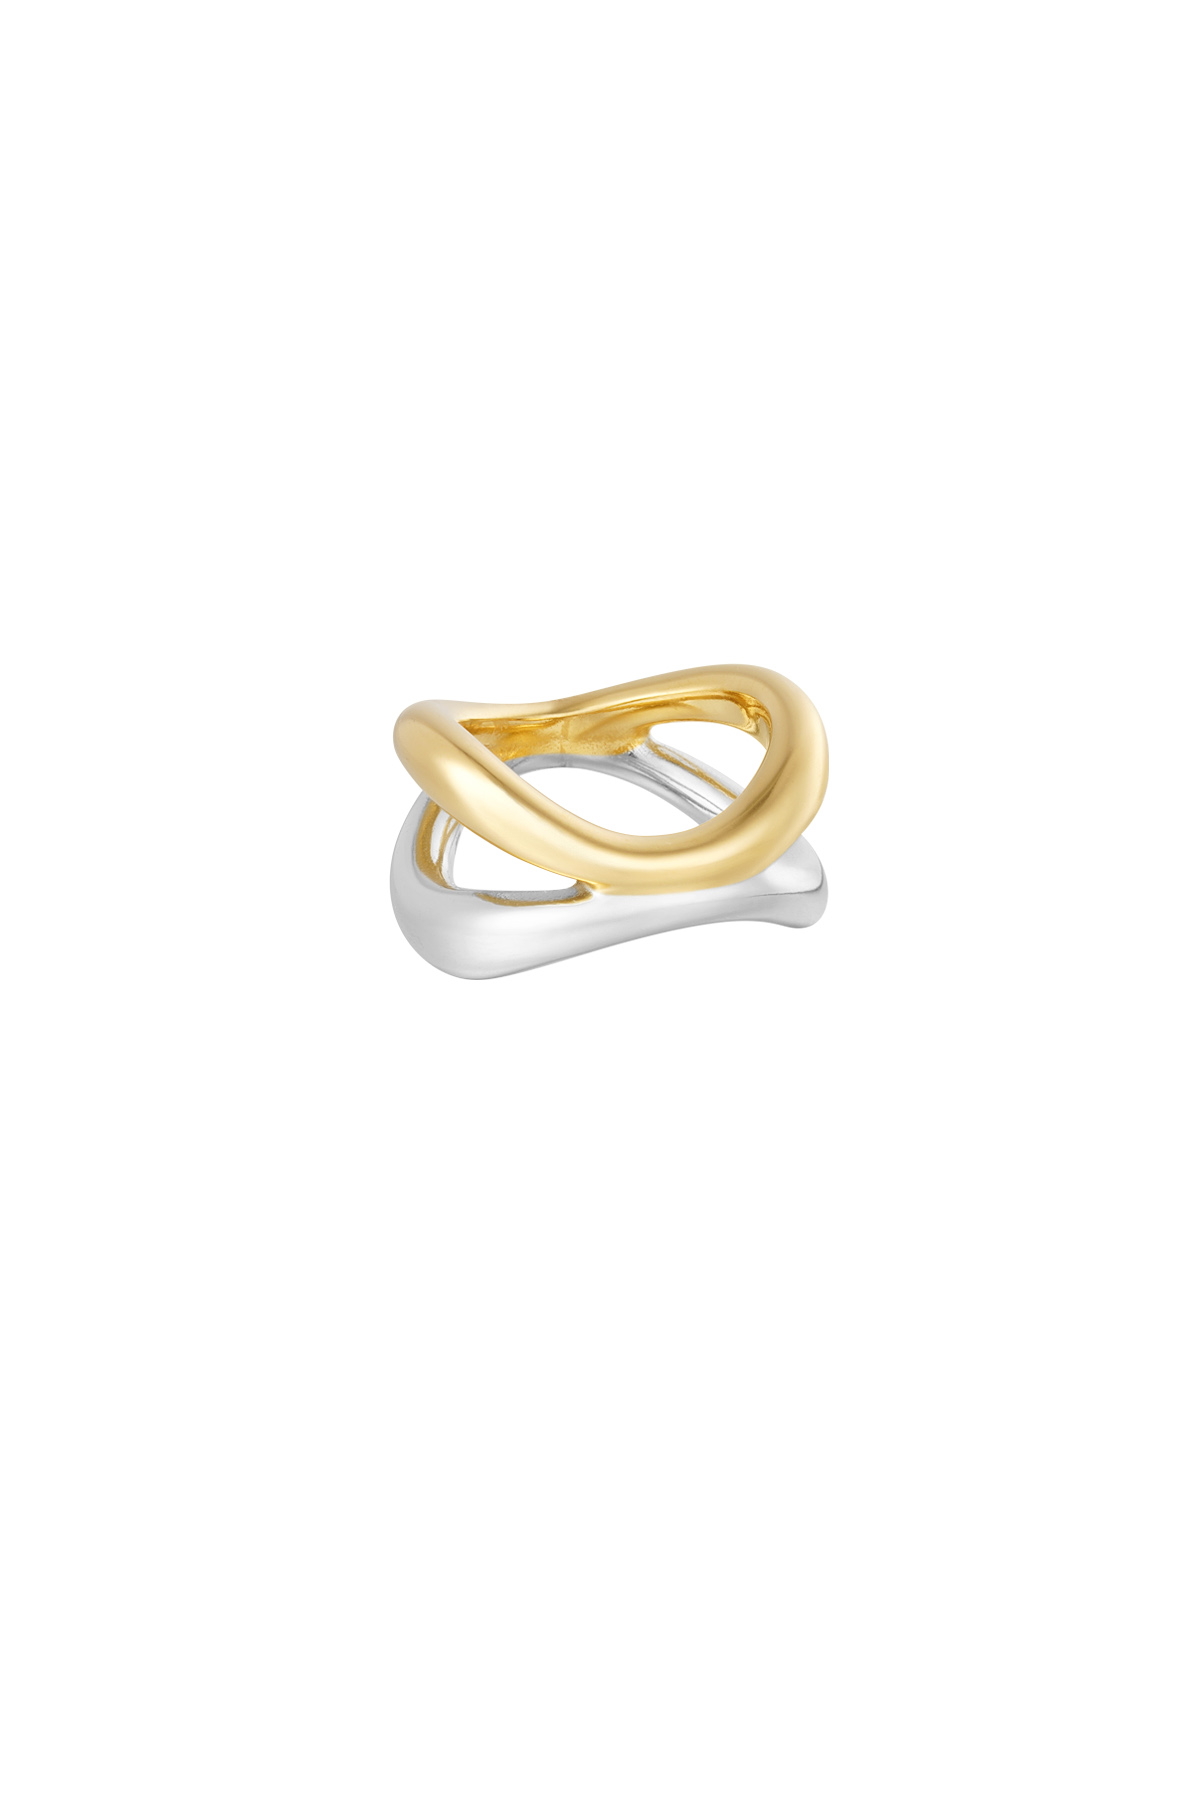 Ring connected - goud/zilver h5 